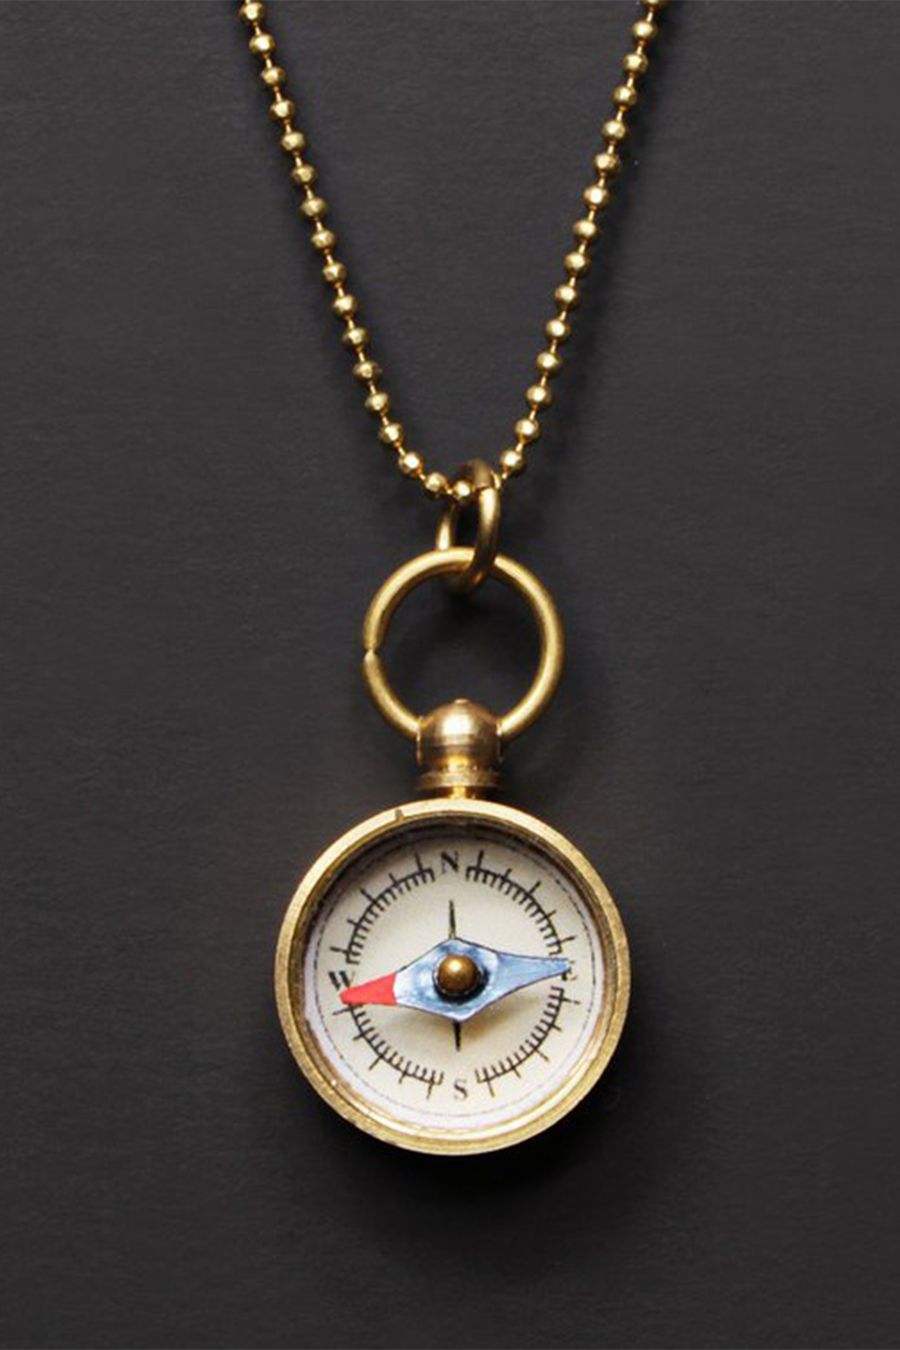 Gold Miniature Compass Necklace - Main Image Number 1 of 2